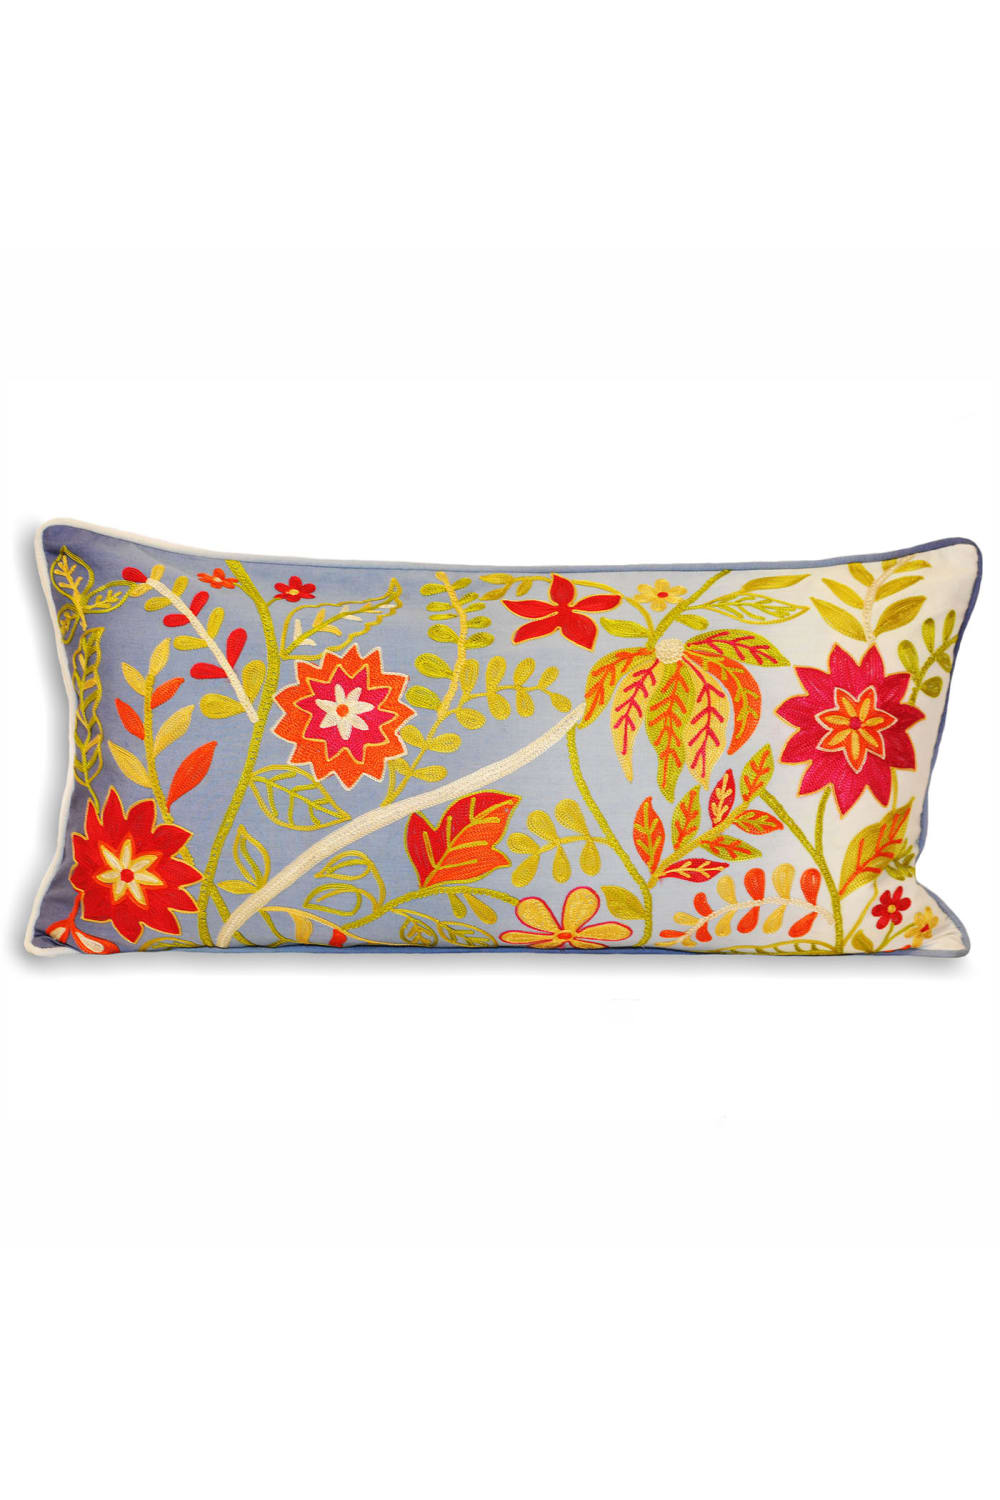 Riva Home Indian Collection Juliette Cushion Cover (Multi) (18 x 18 inch)